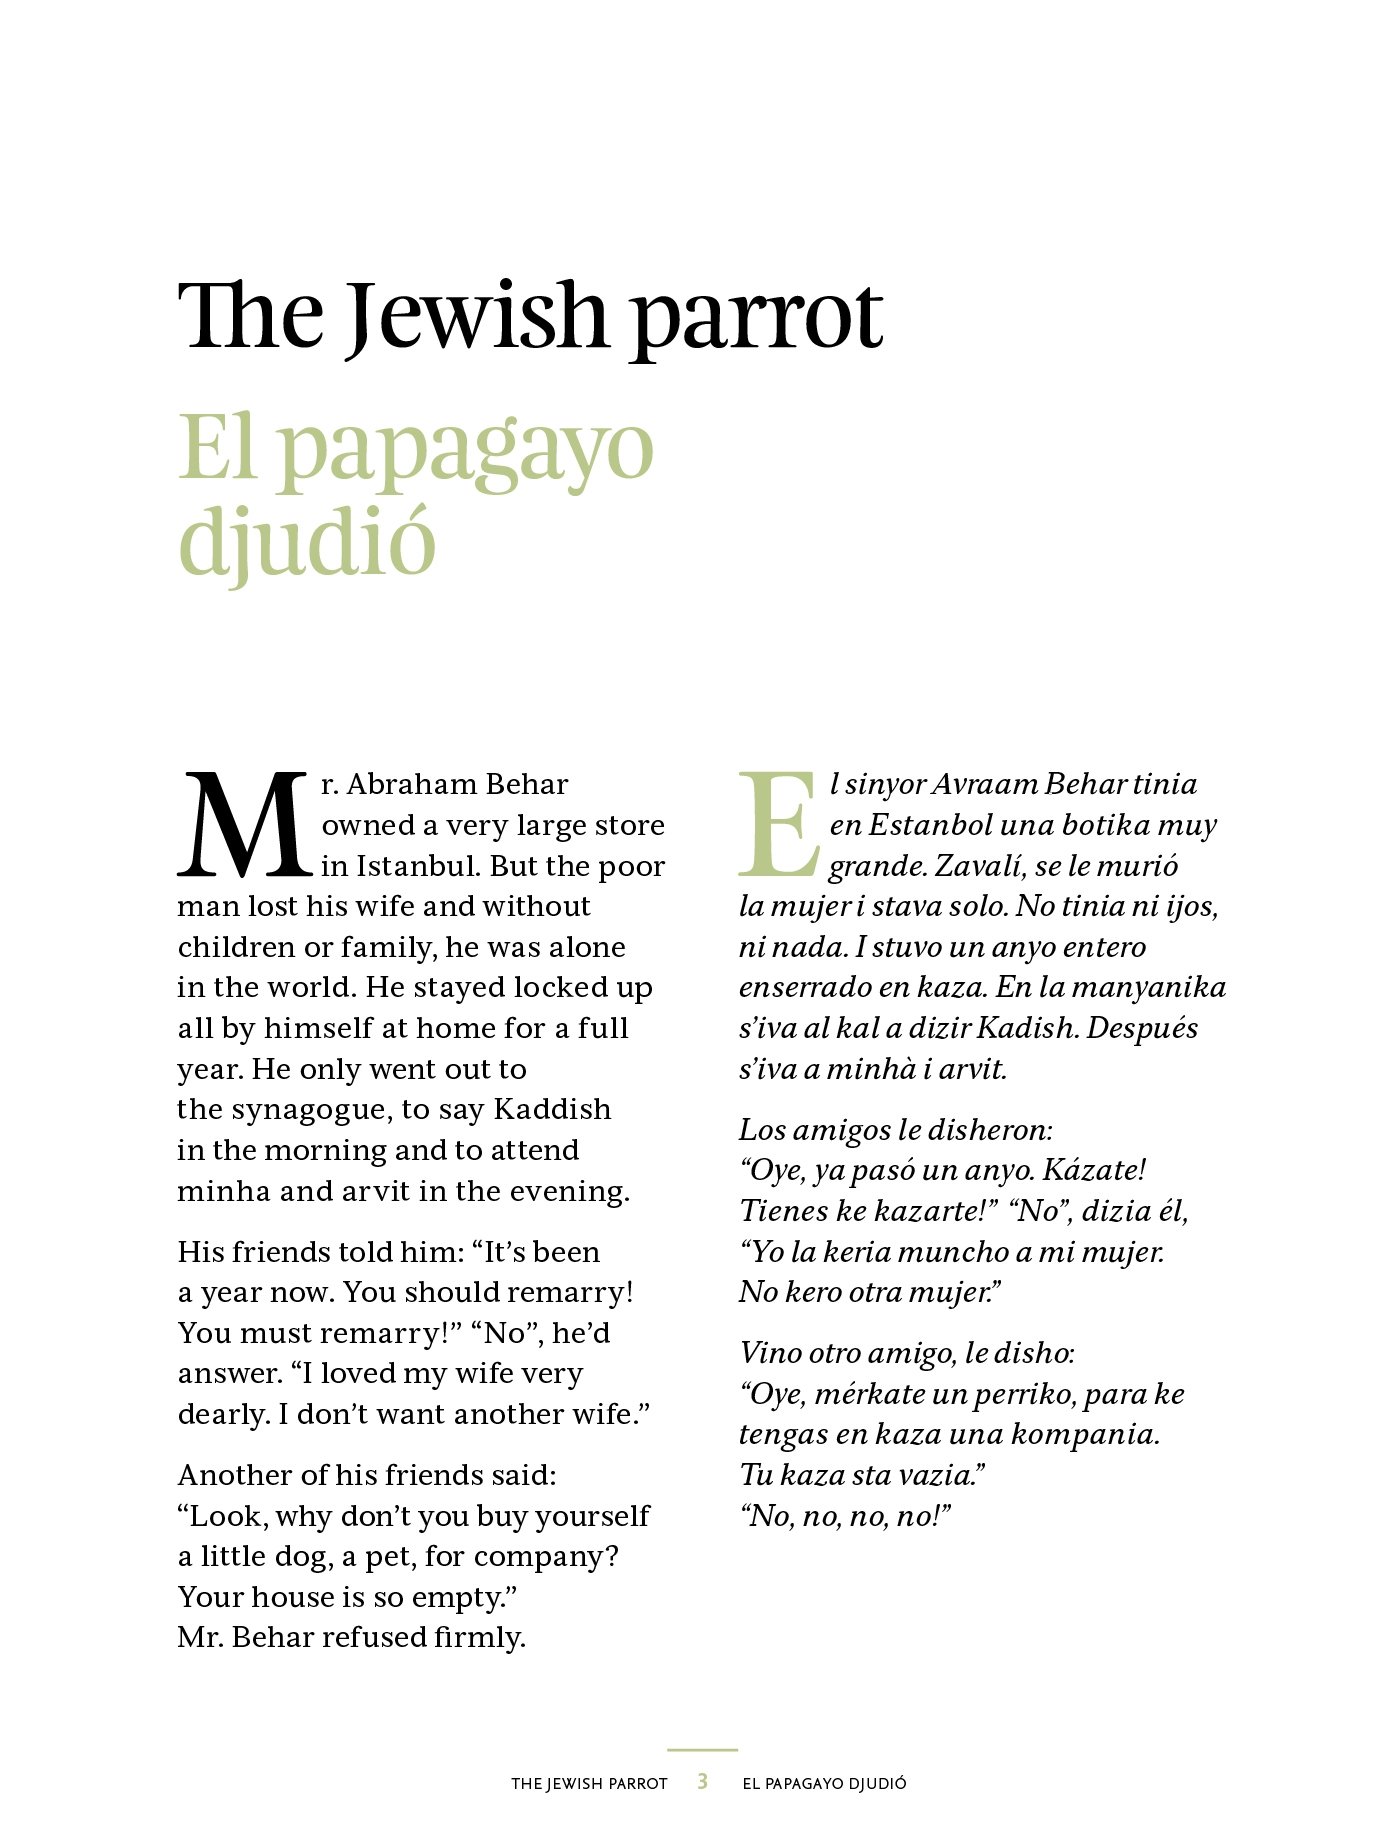 Page from the book "The Jewish Parrot," showing the bilingual text, with English on one side and Ladino on the other